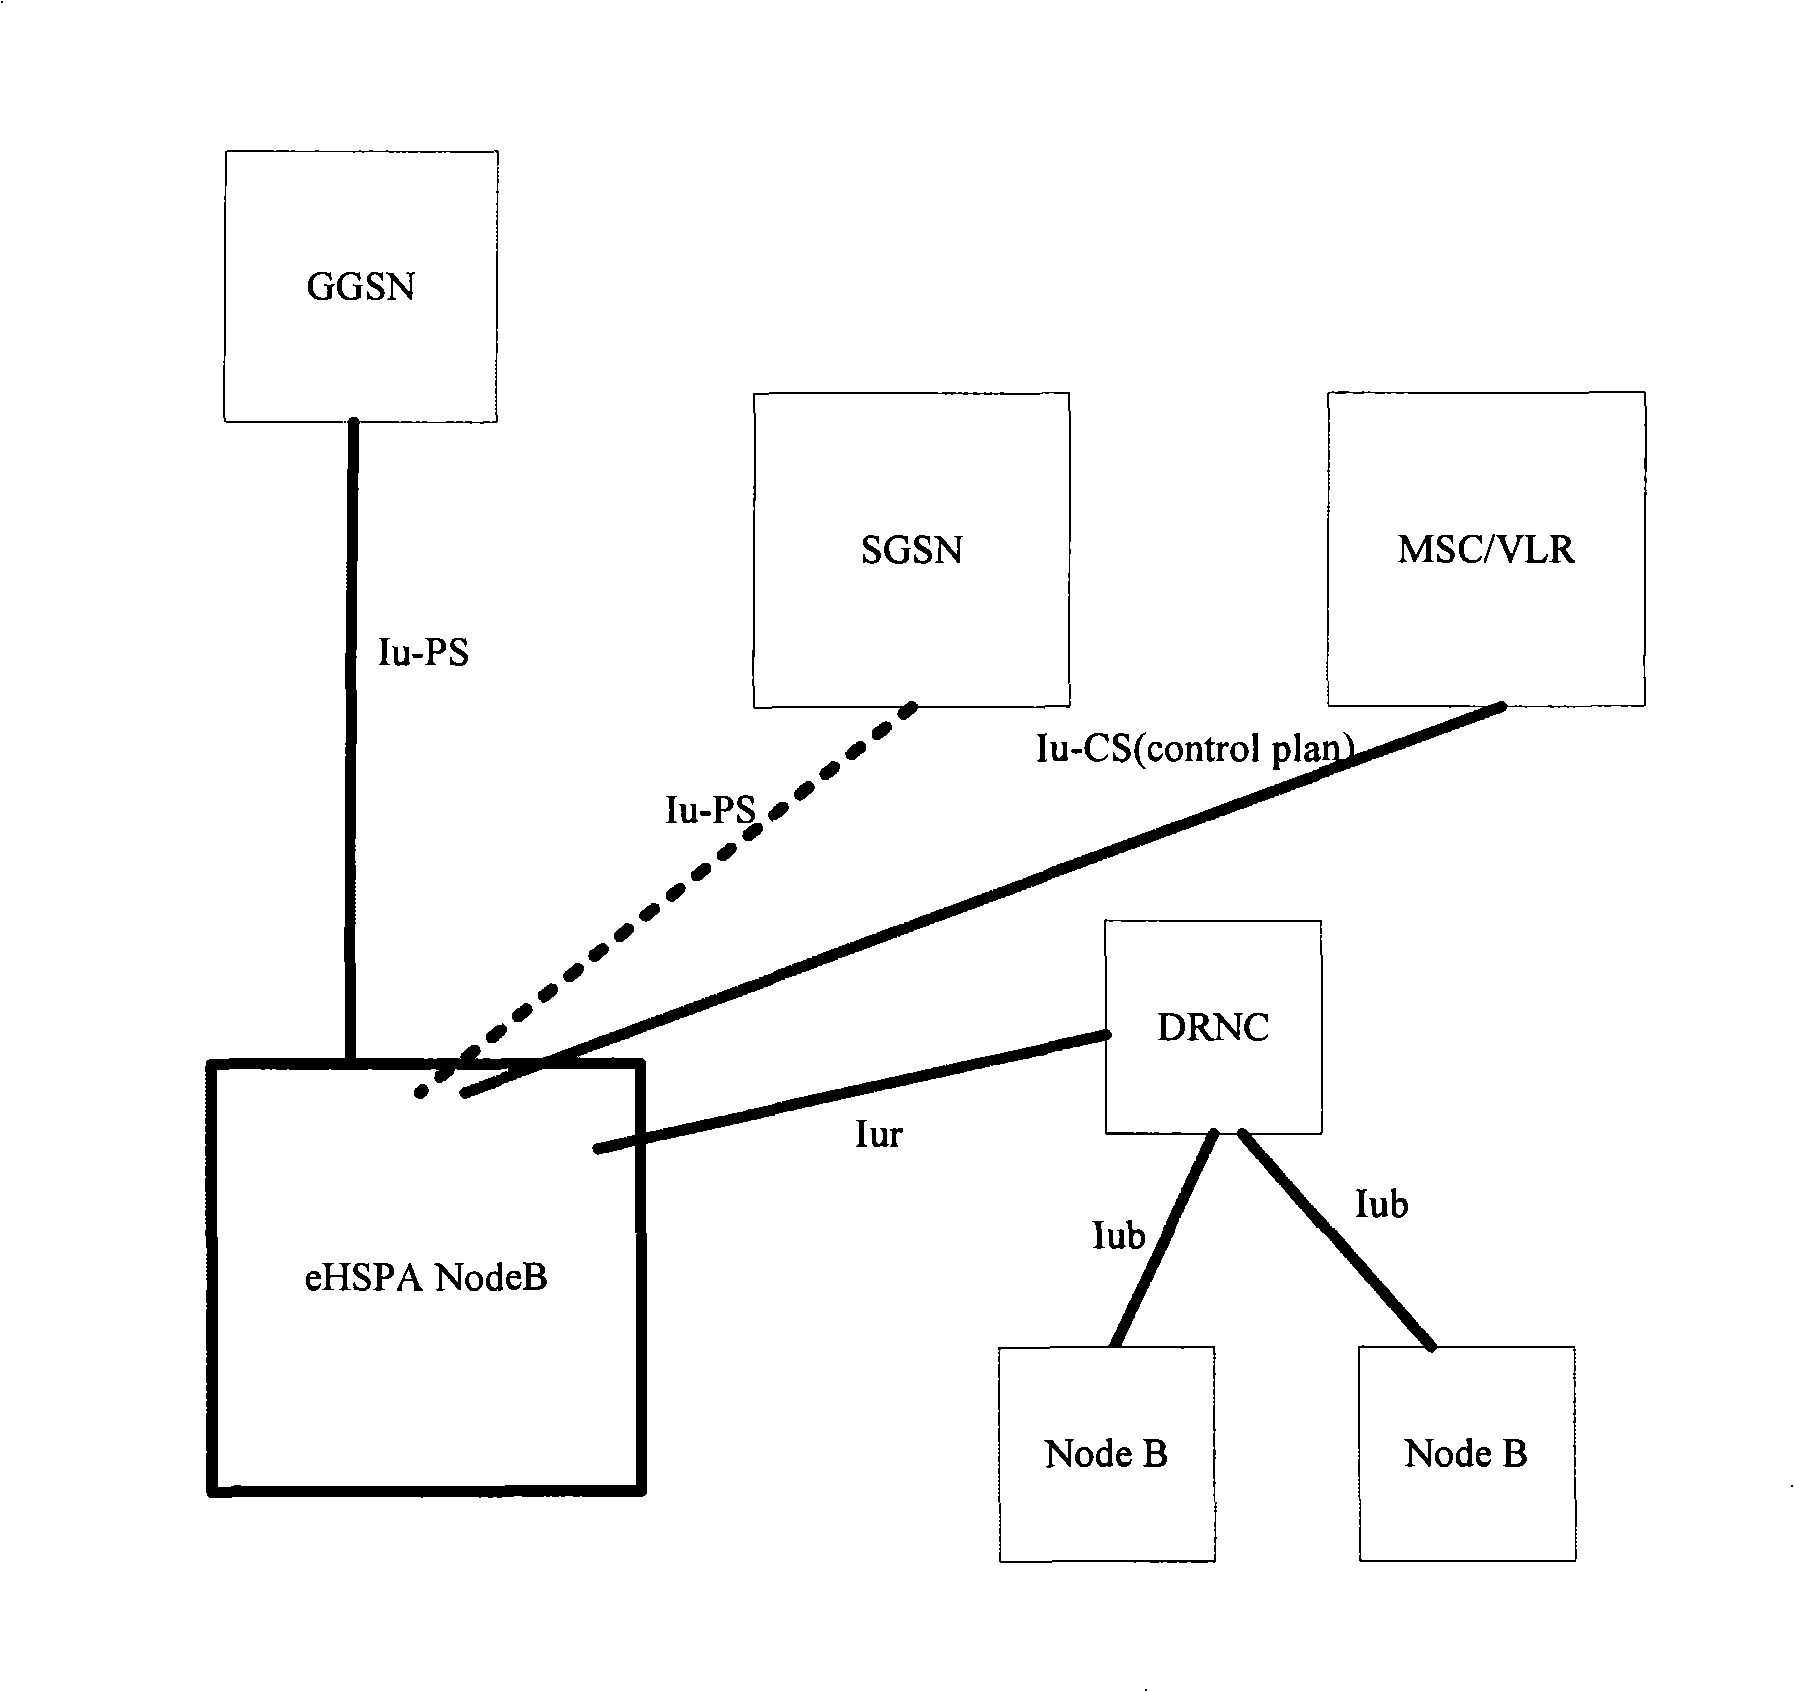 Relocating method for WCDMA system